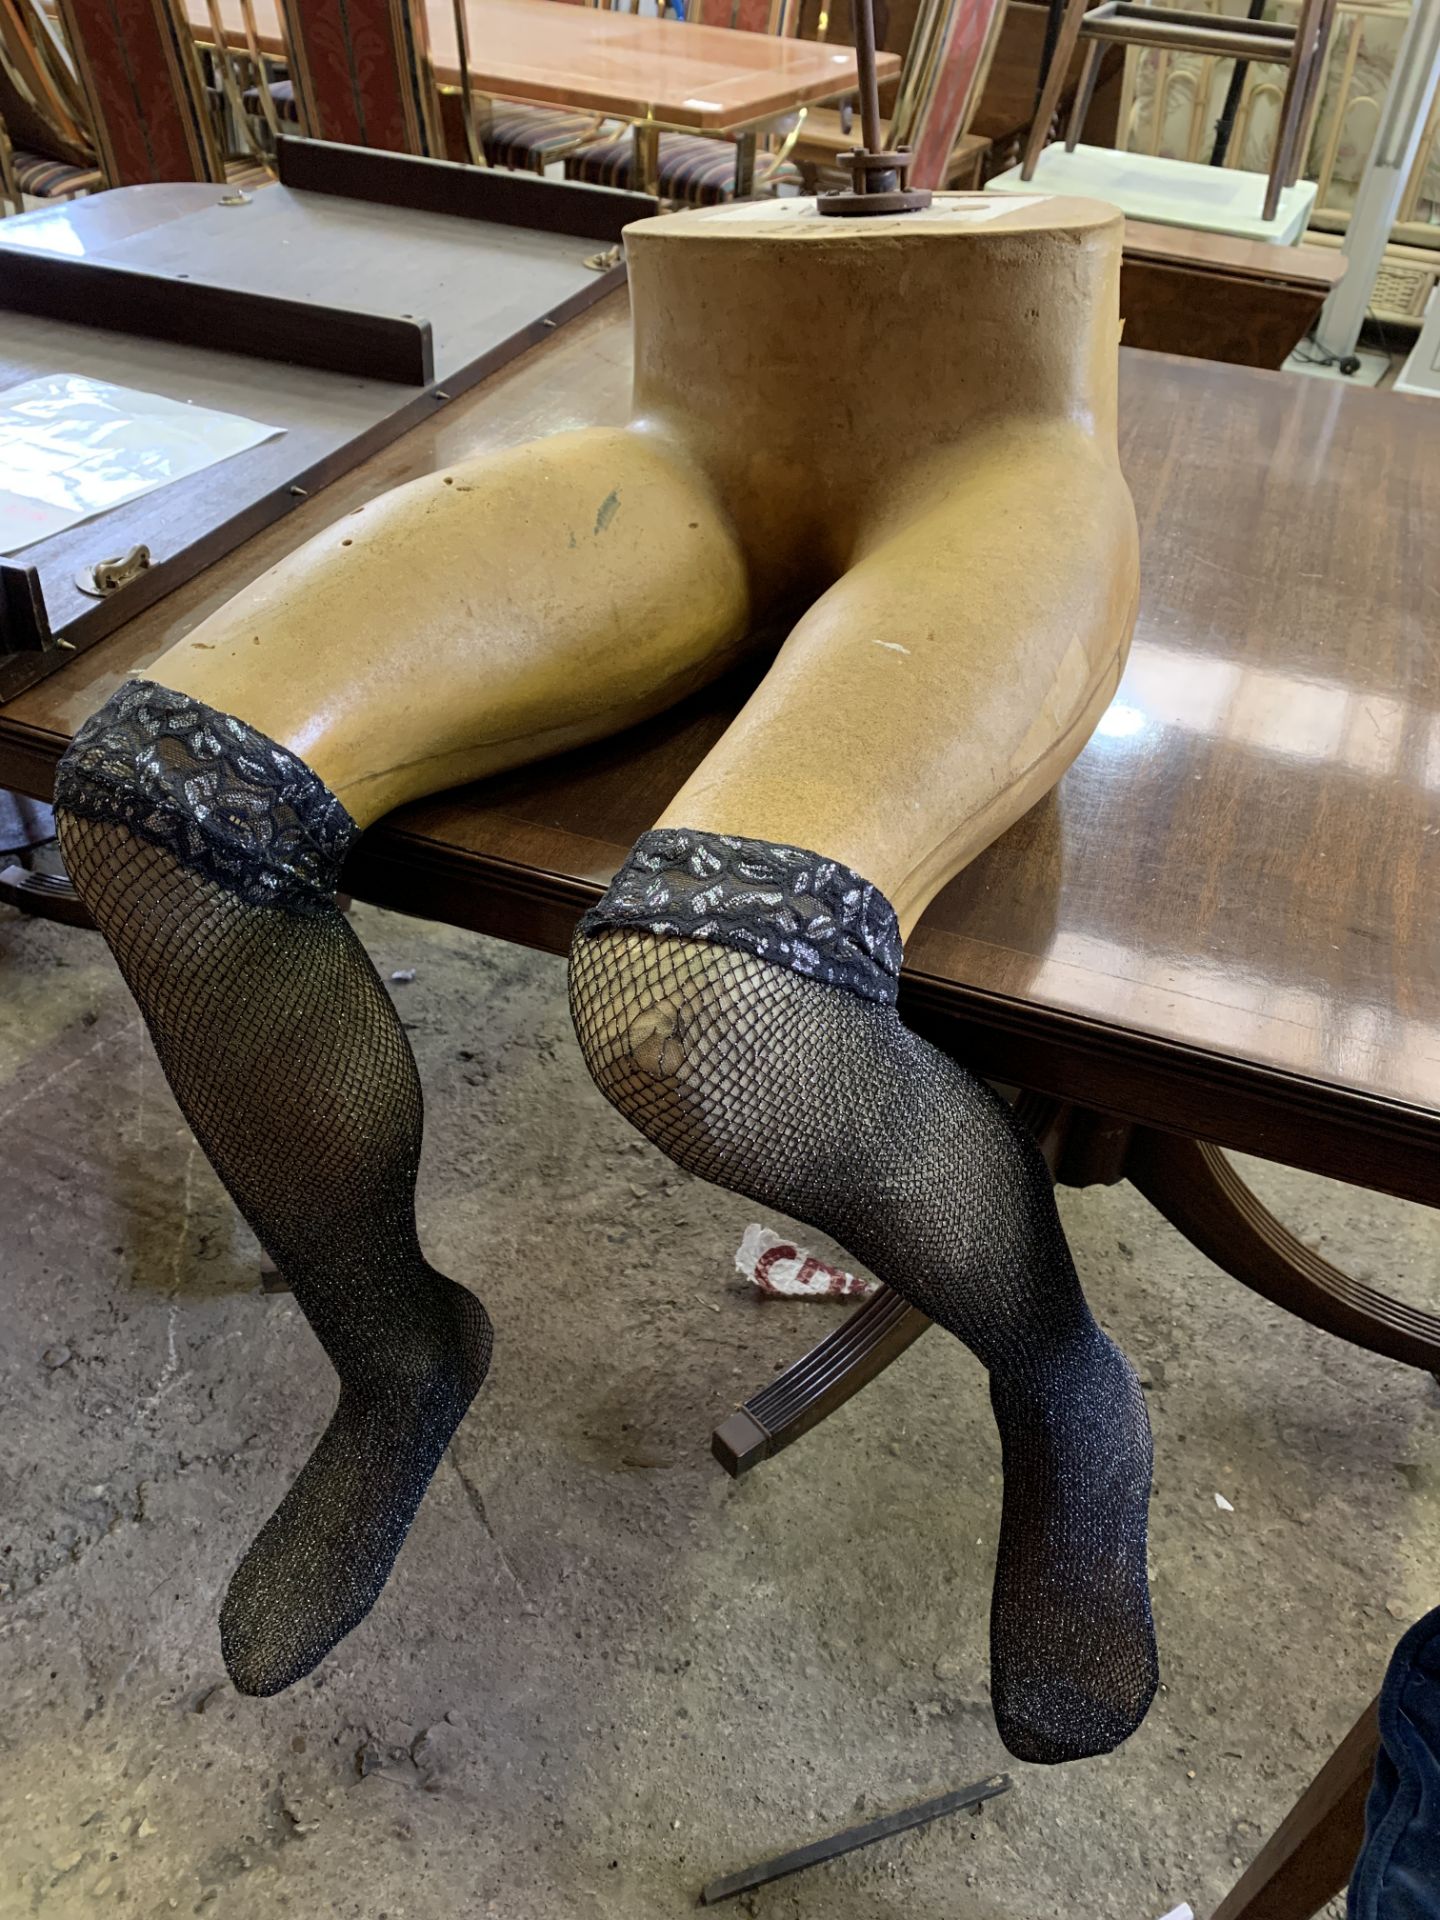 Seated stockings display mannequin. - Image 2 of 2